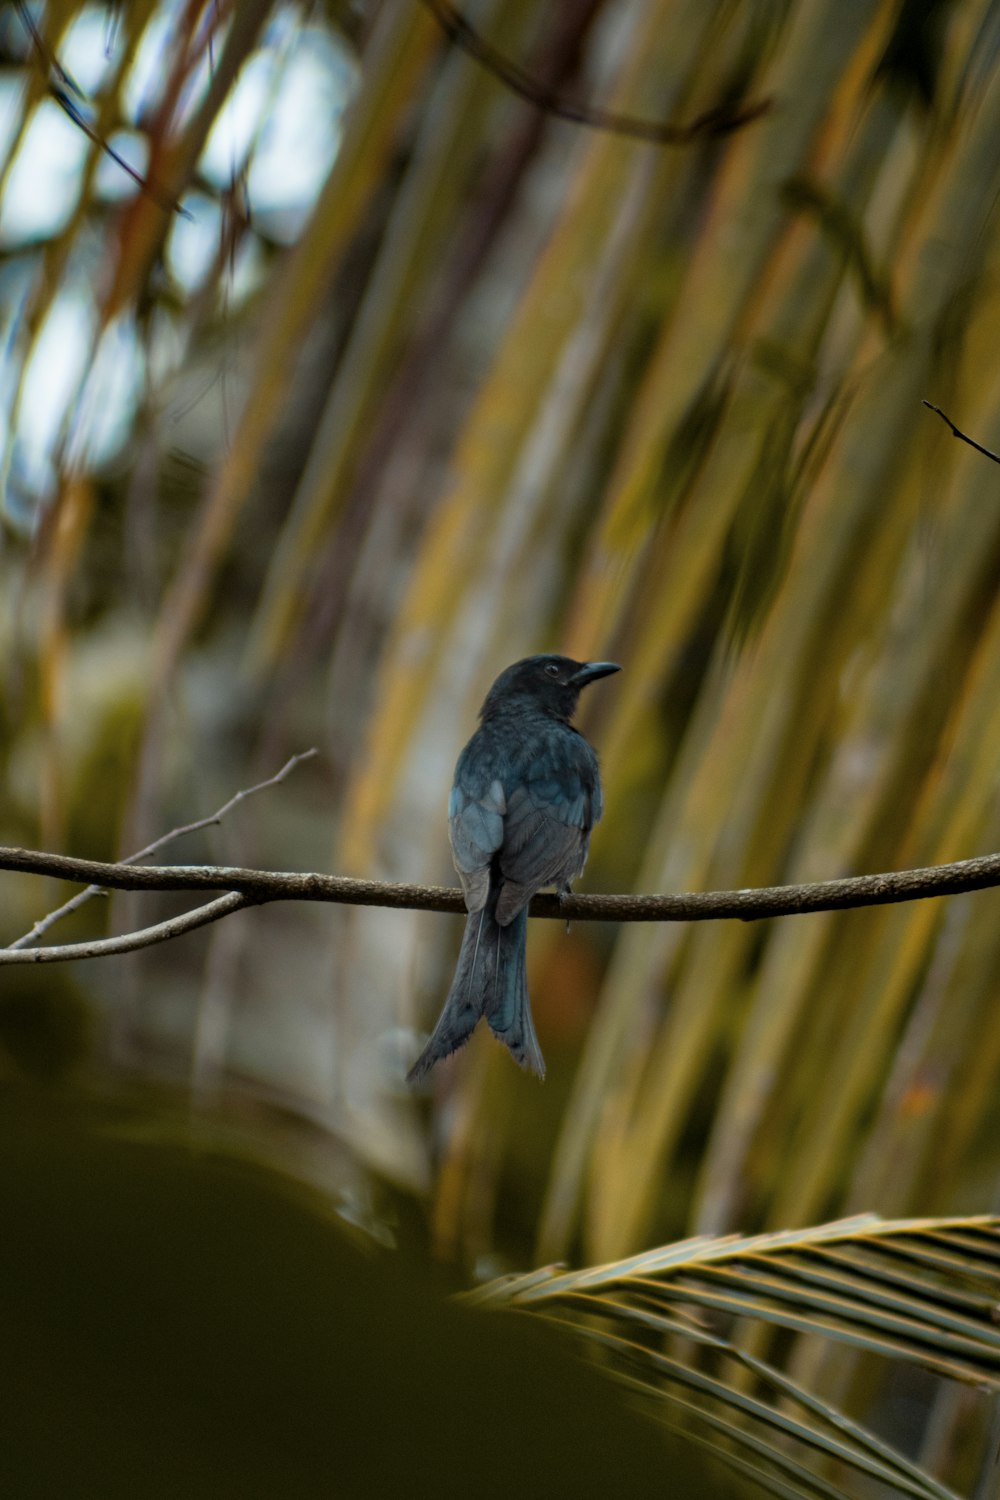 a bird sitting on a branch in front of a bamboo tree